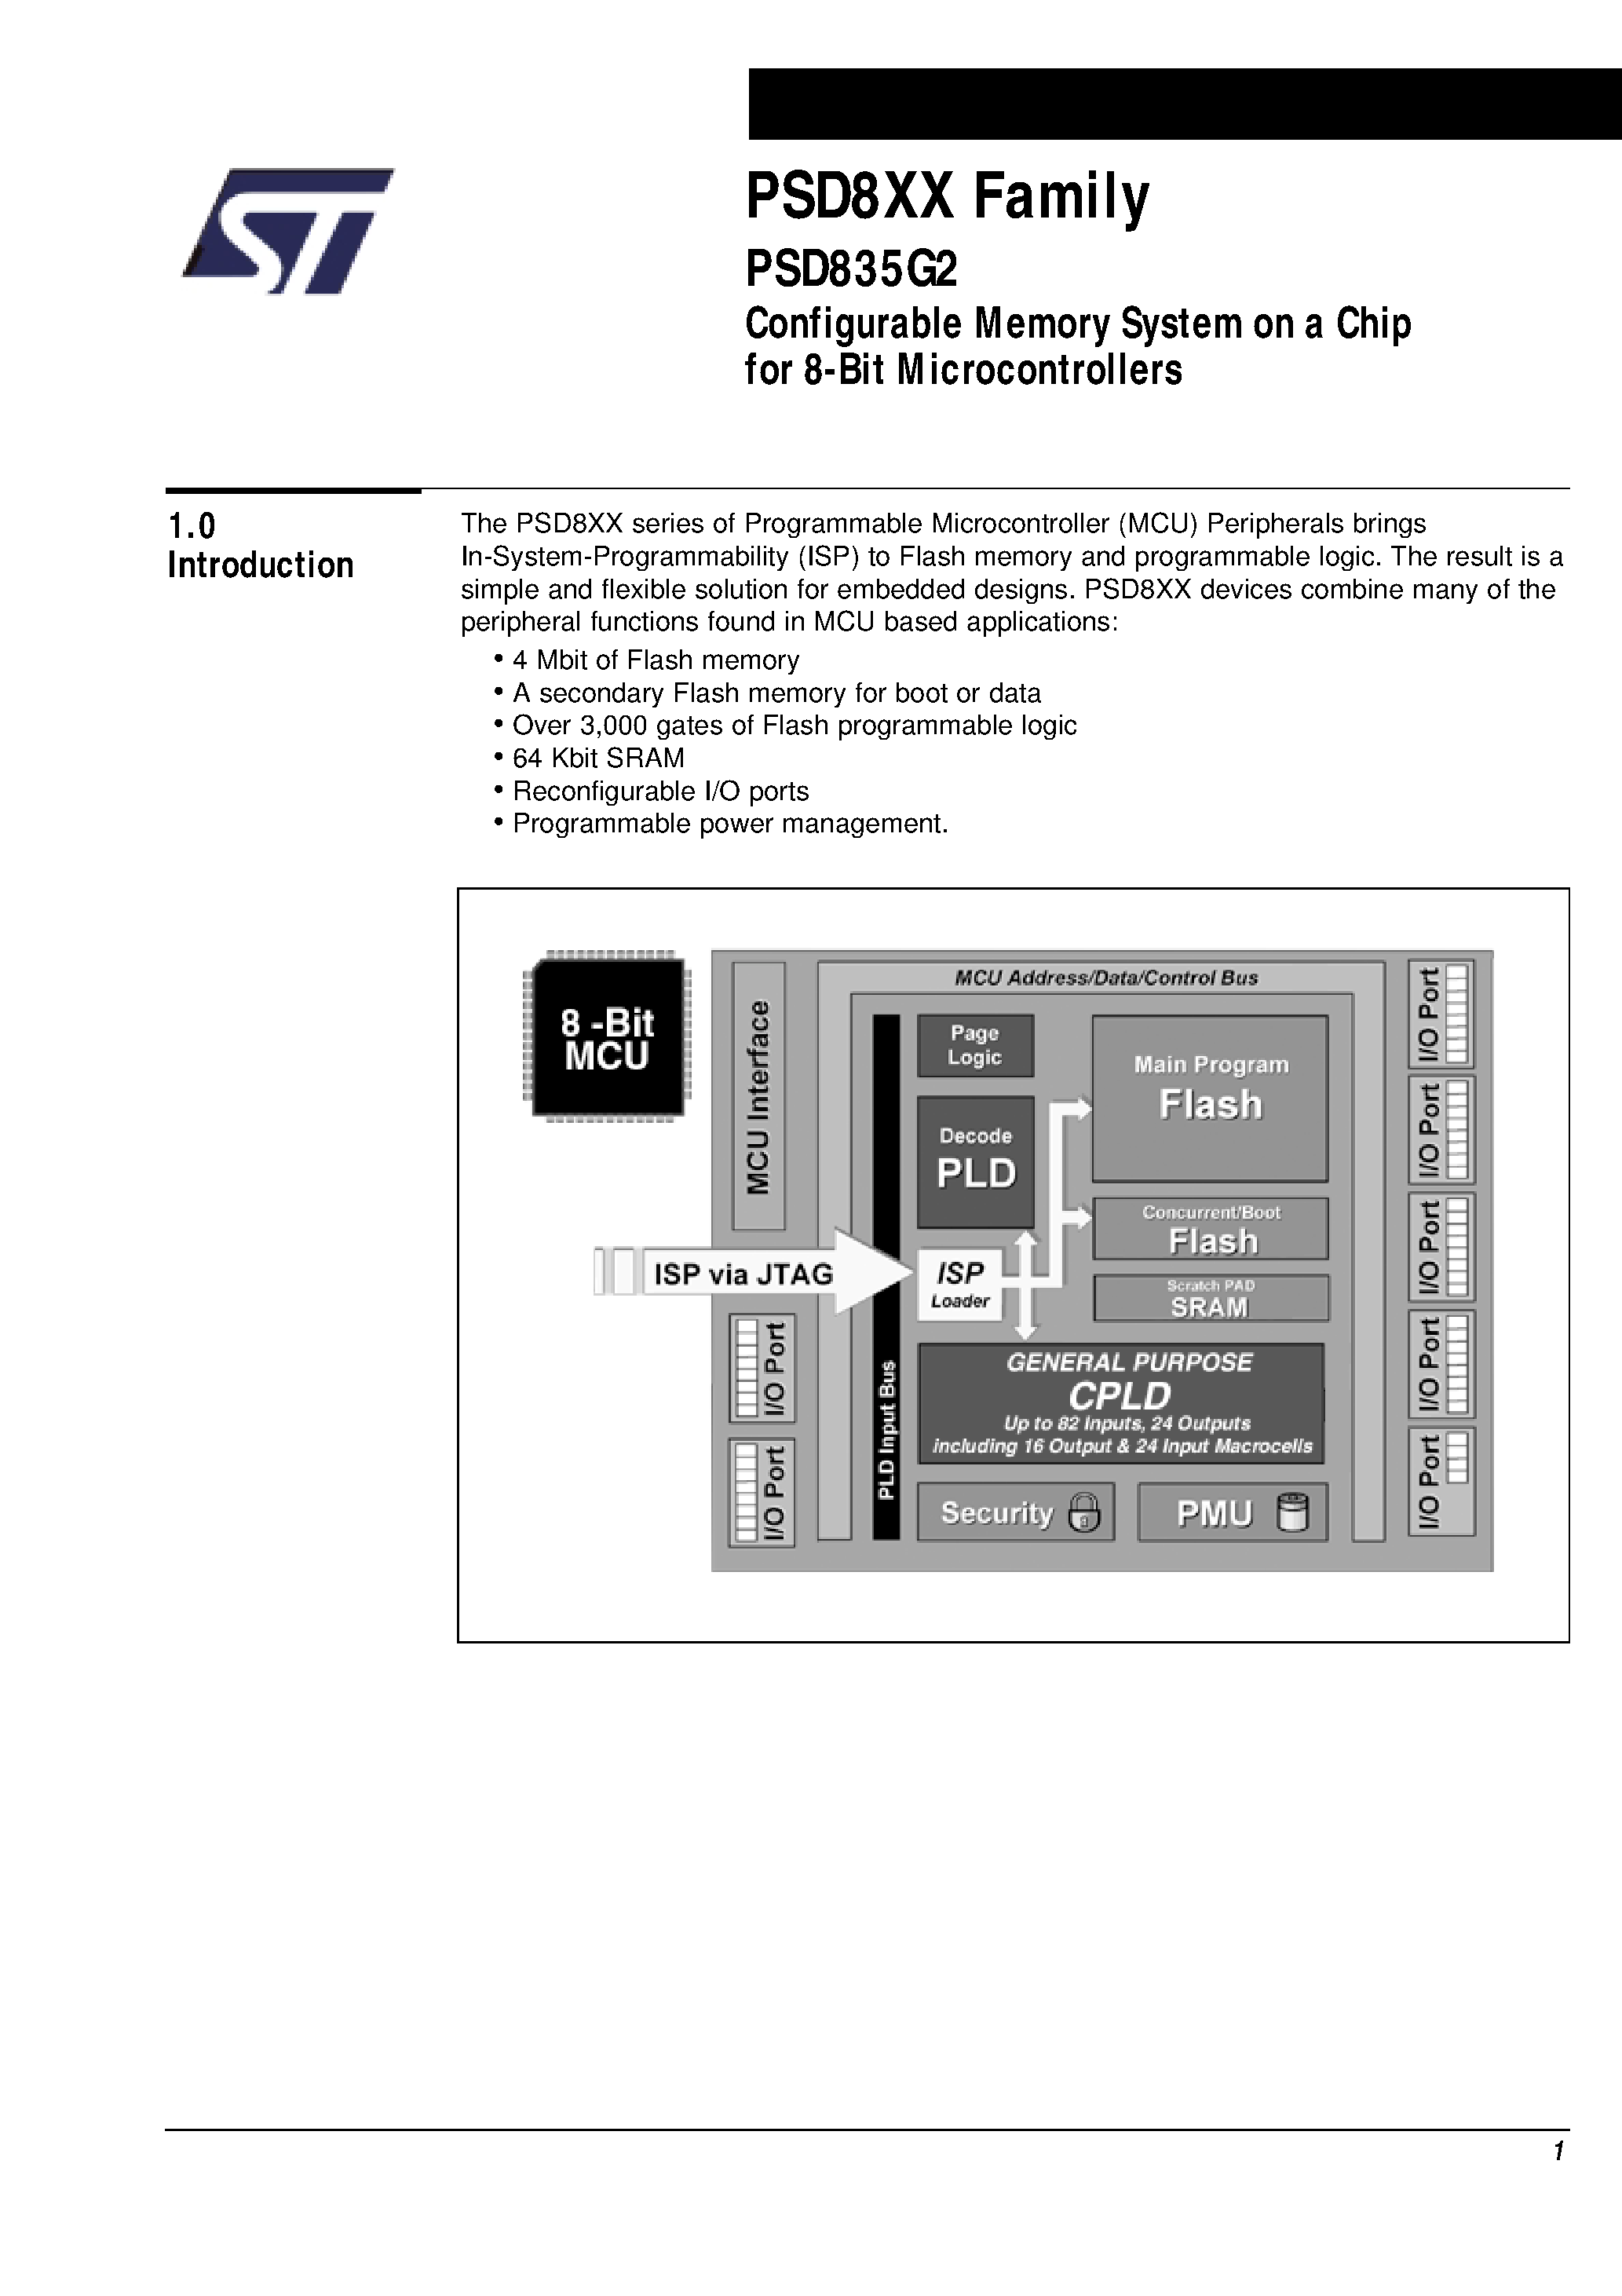 Datasheet PSD835F1-A-12J - Configurable Memory System on a Chip for 8-Bit Microcontrollers page 2